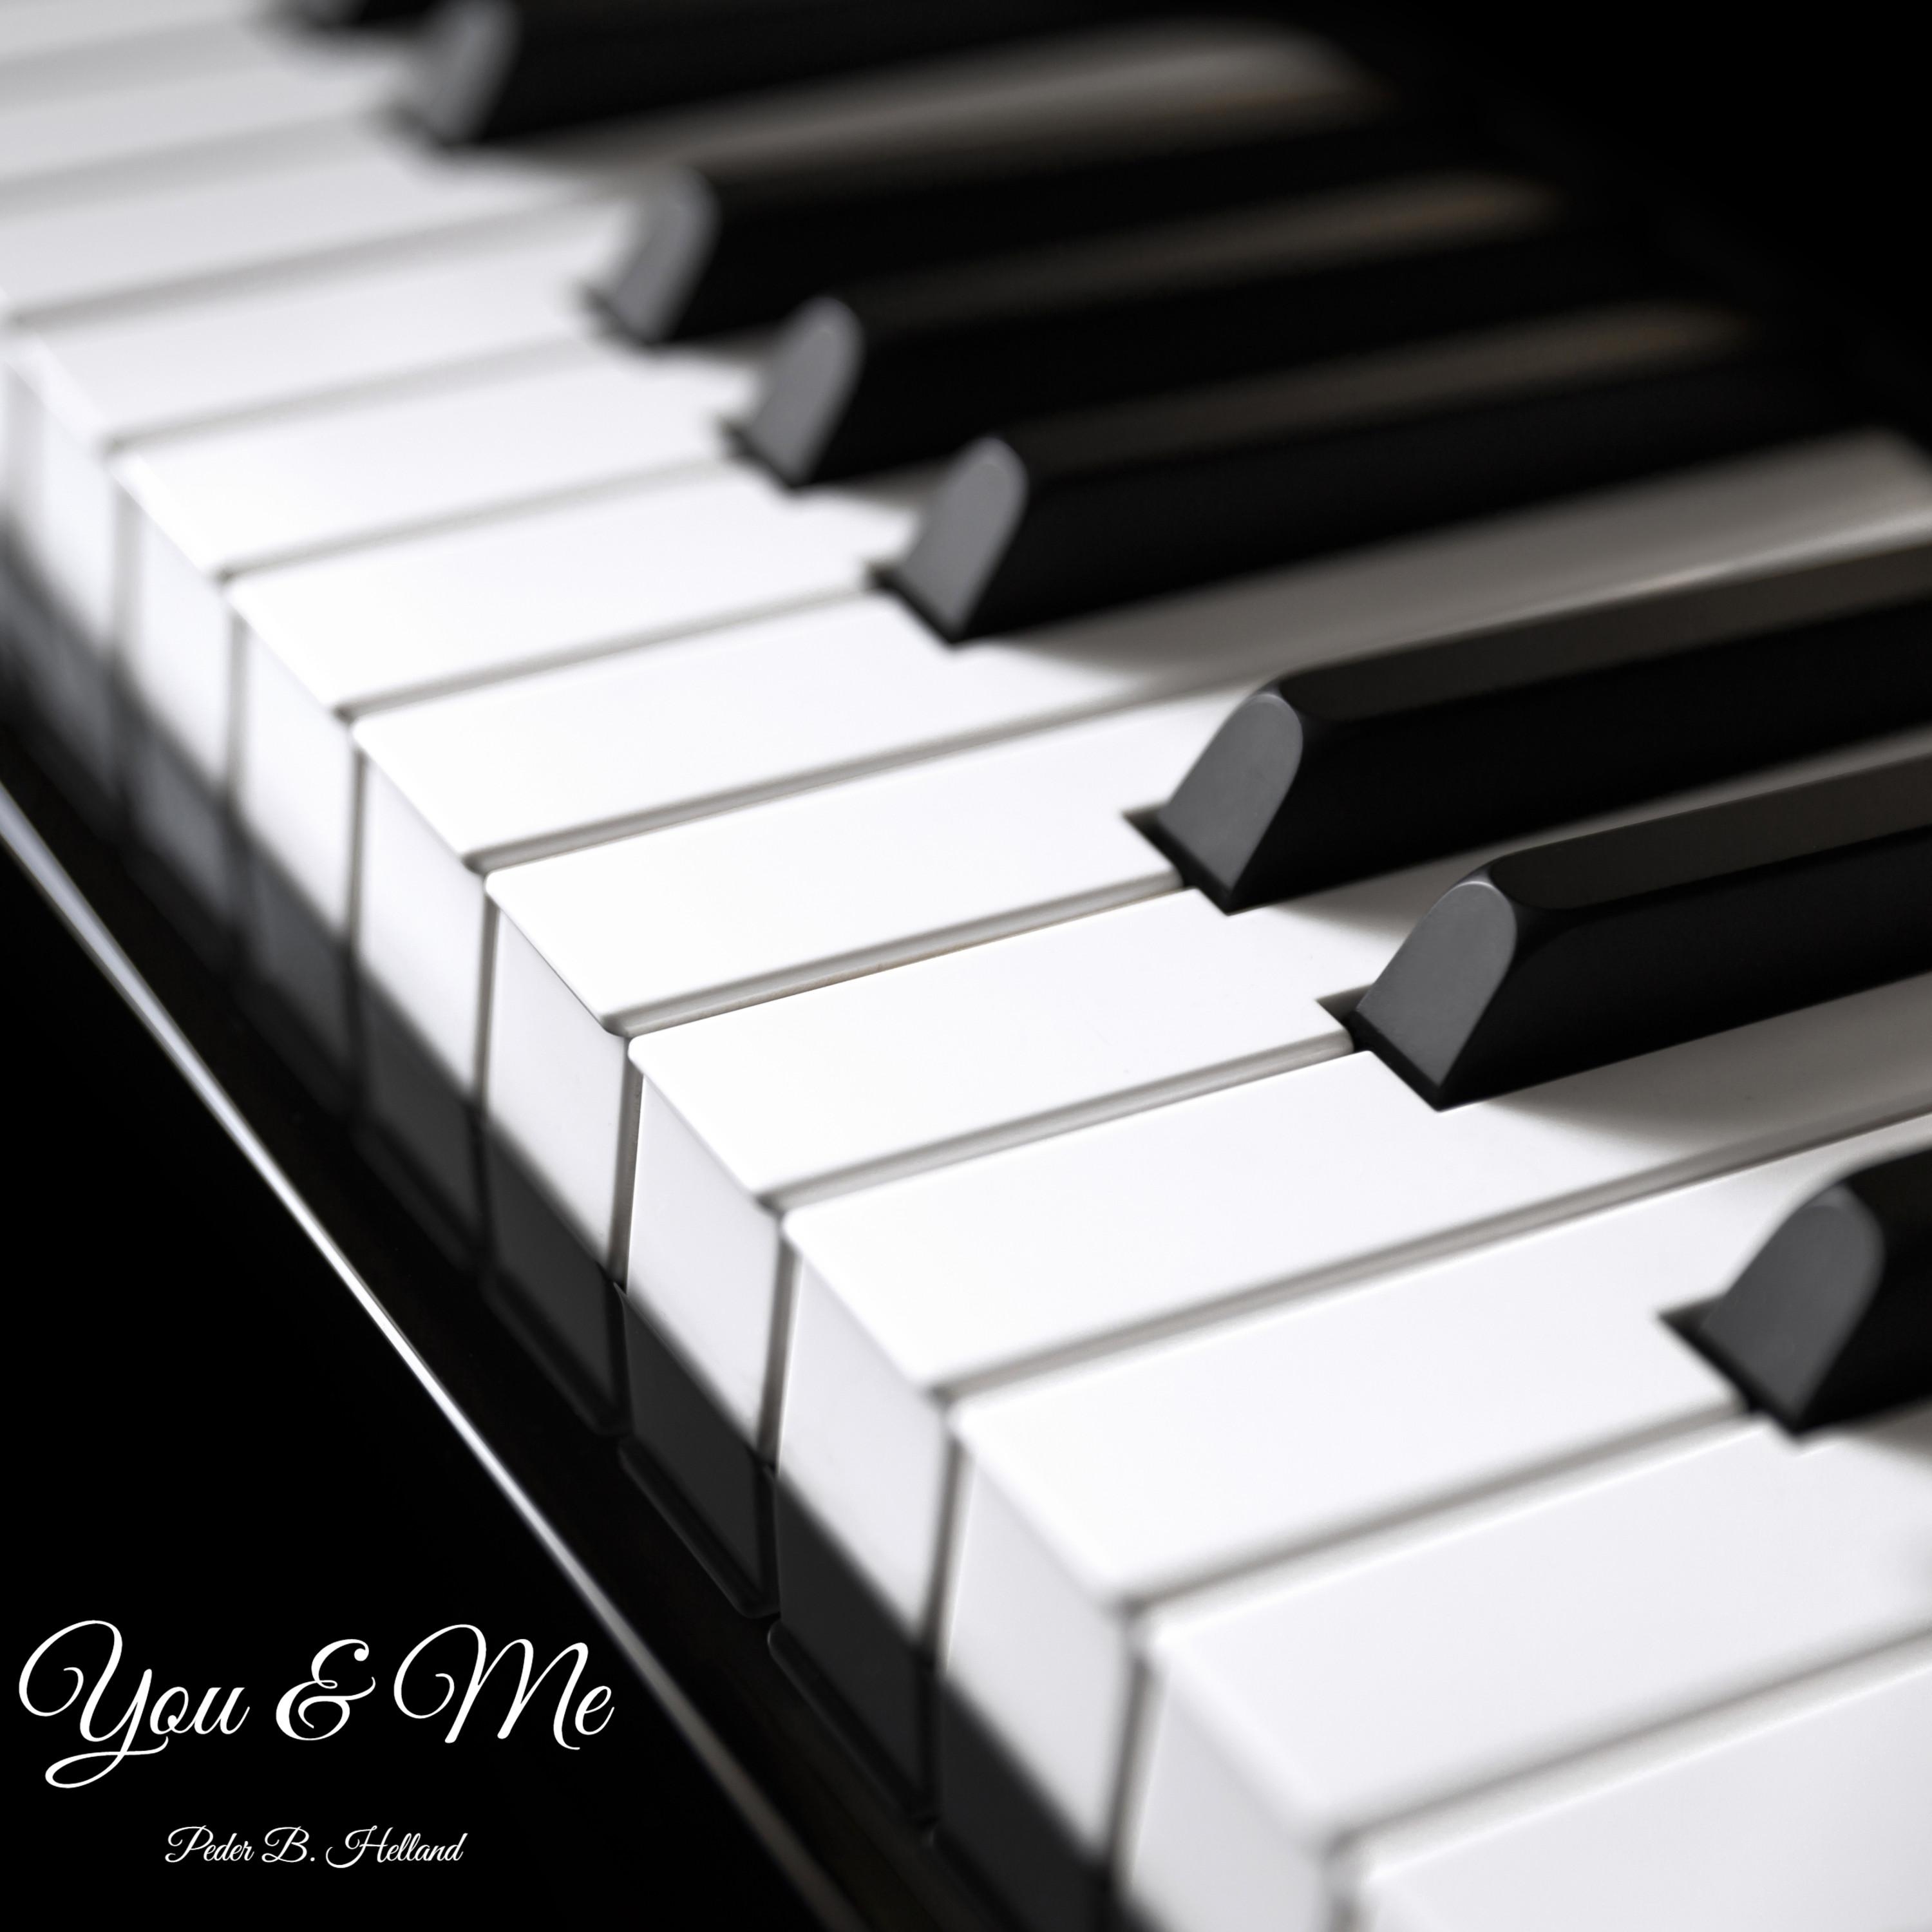 Cover art for the single You & Me (Piano Version) by Peder B. Helland